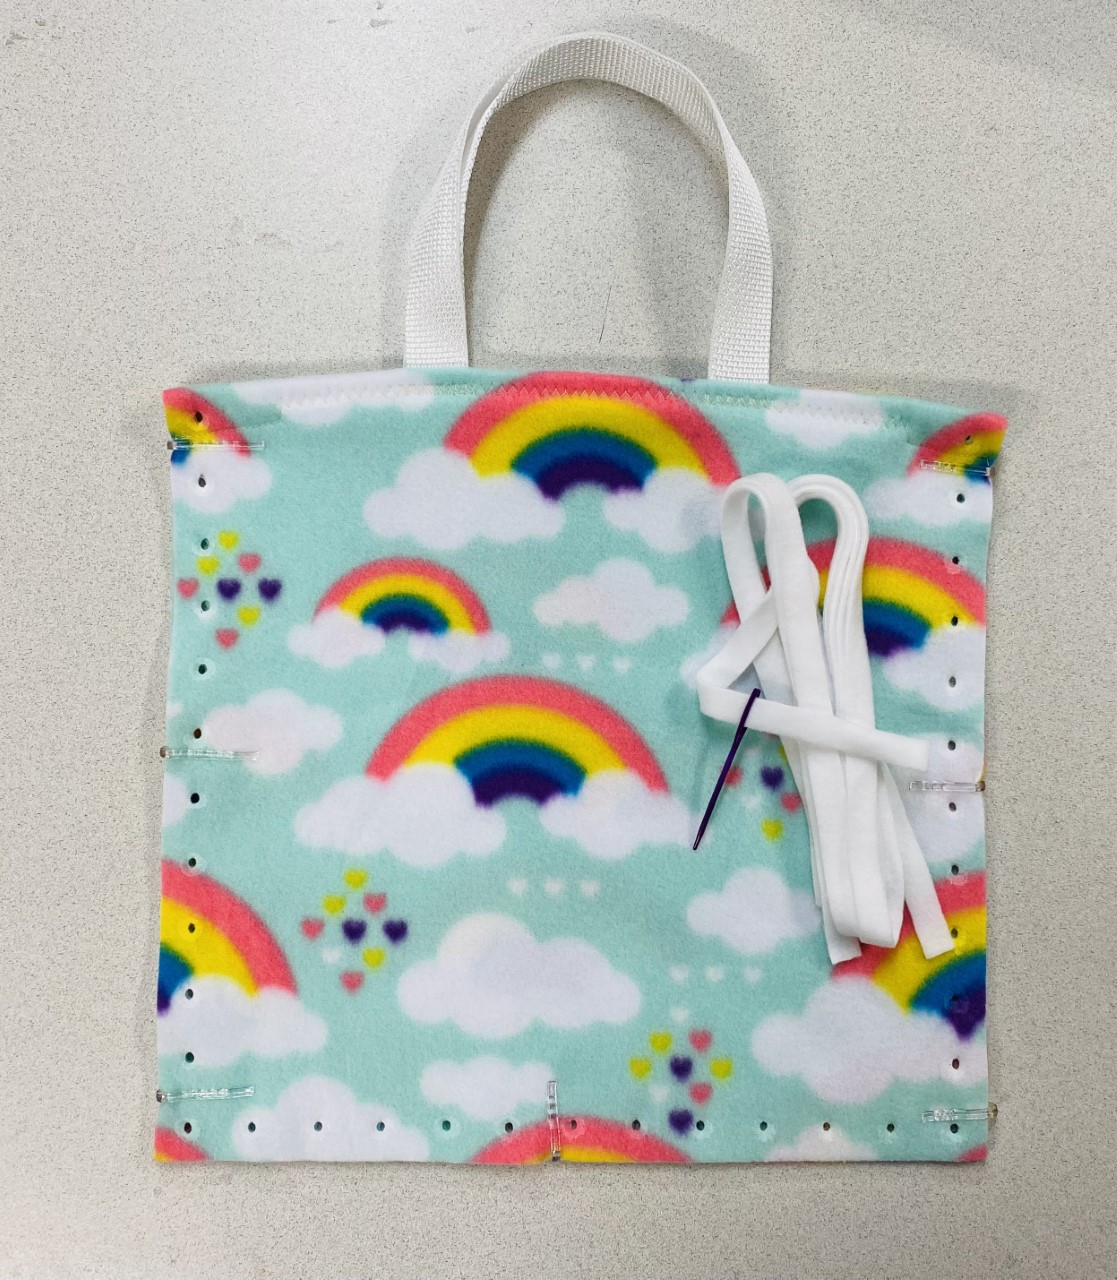 13" fleece tote bag in light teal with rainbows, clouds and small hearts, white tote straps, and white fleece ribbon to lace with plastic needle